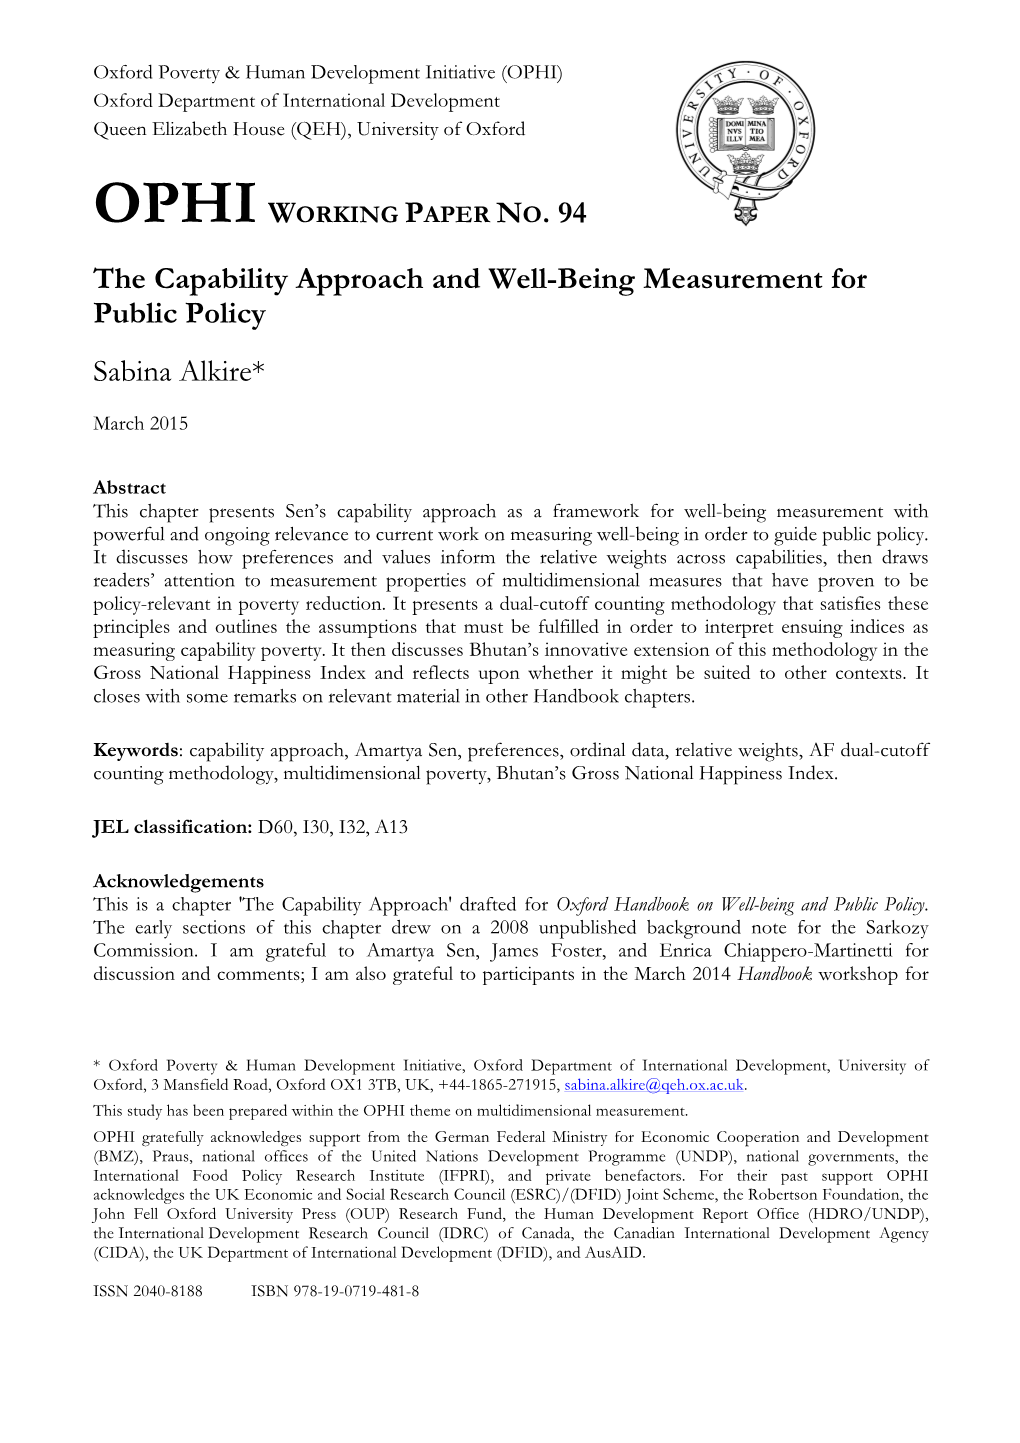 The Capability Approach and Well-Being Measurement for Public Policy